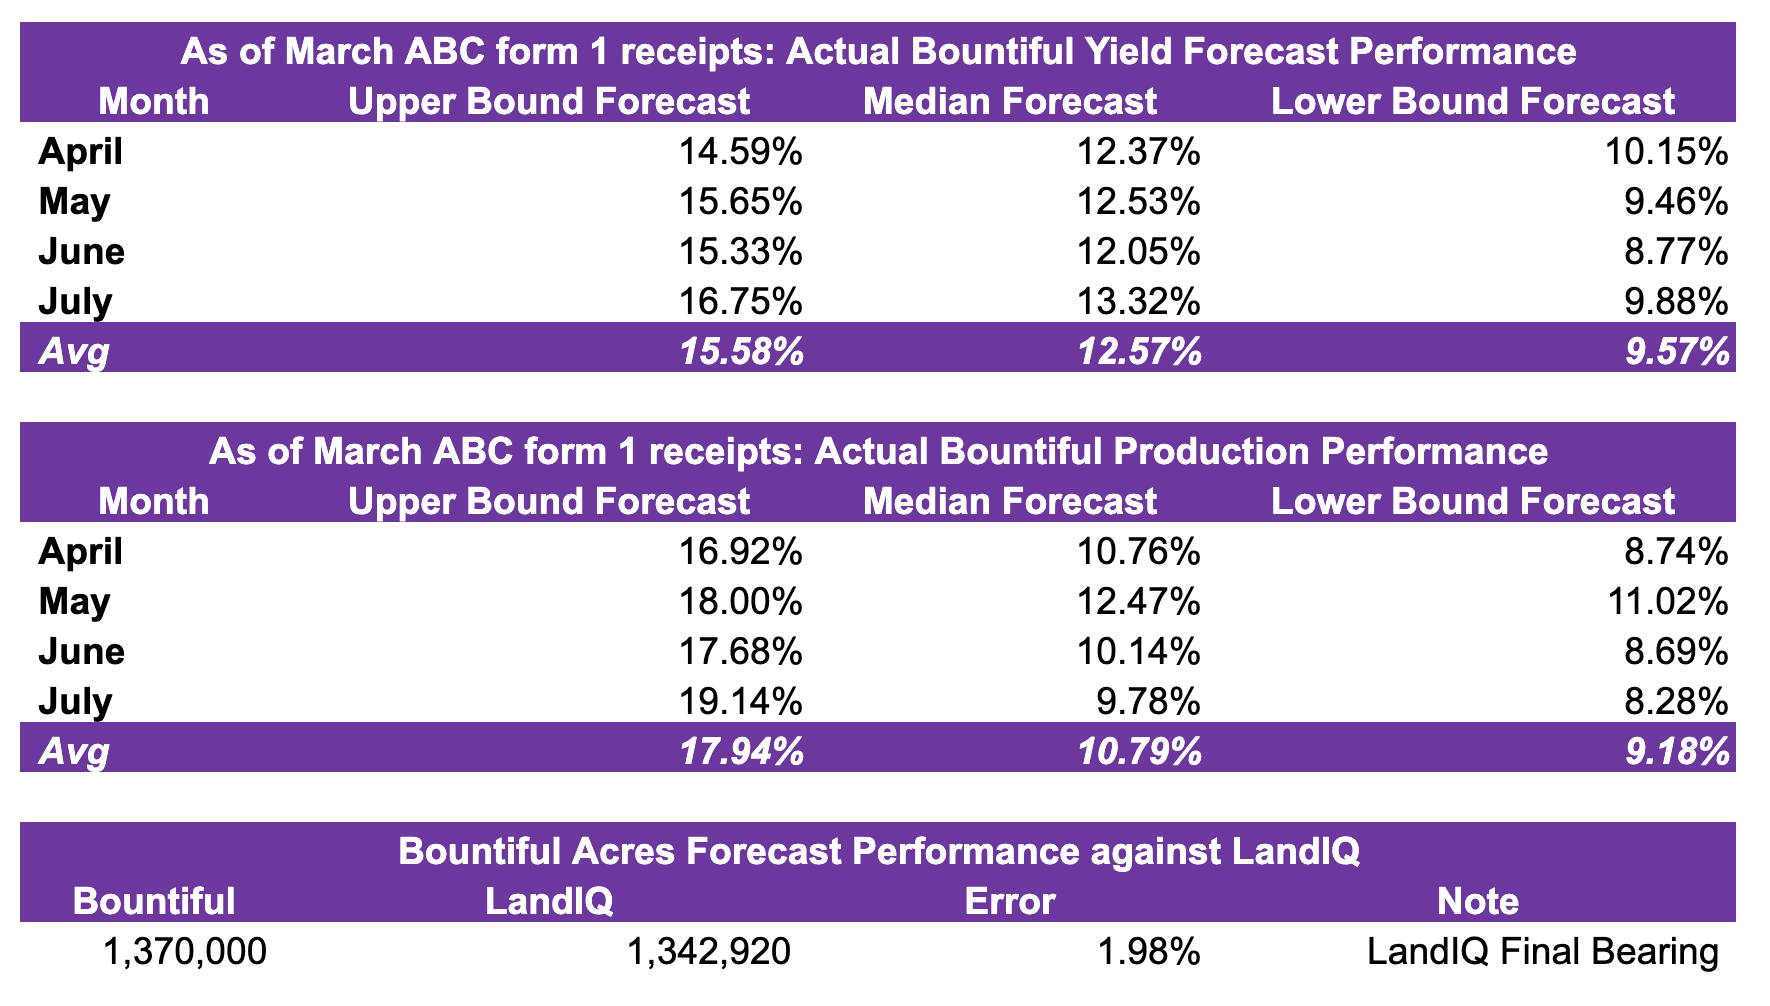 Bountiful 2022 Forecast Performance as of March ABC For 1 receipts